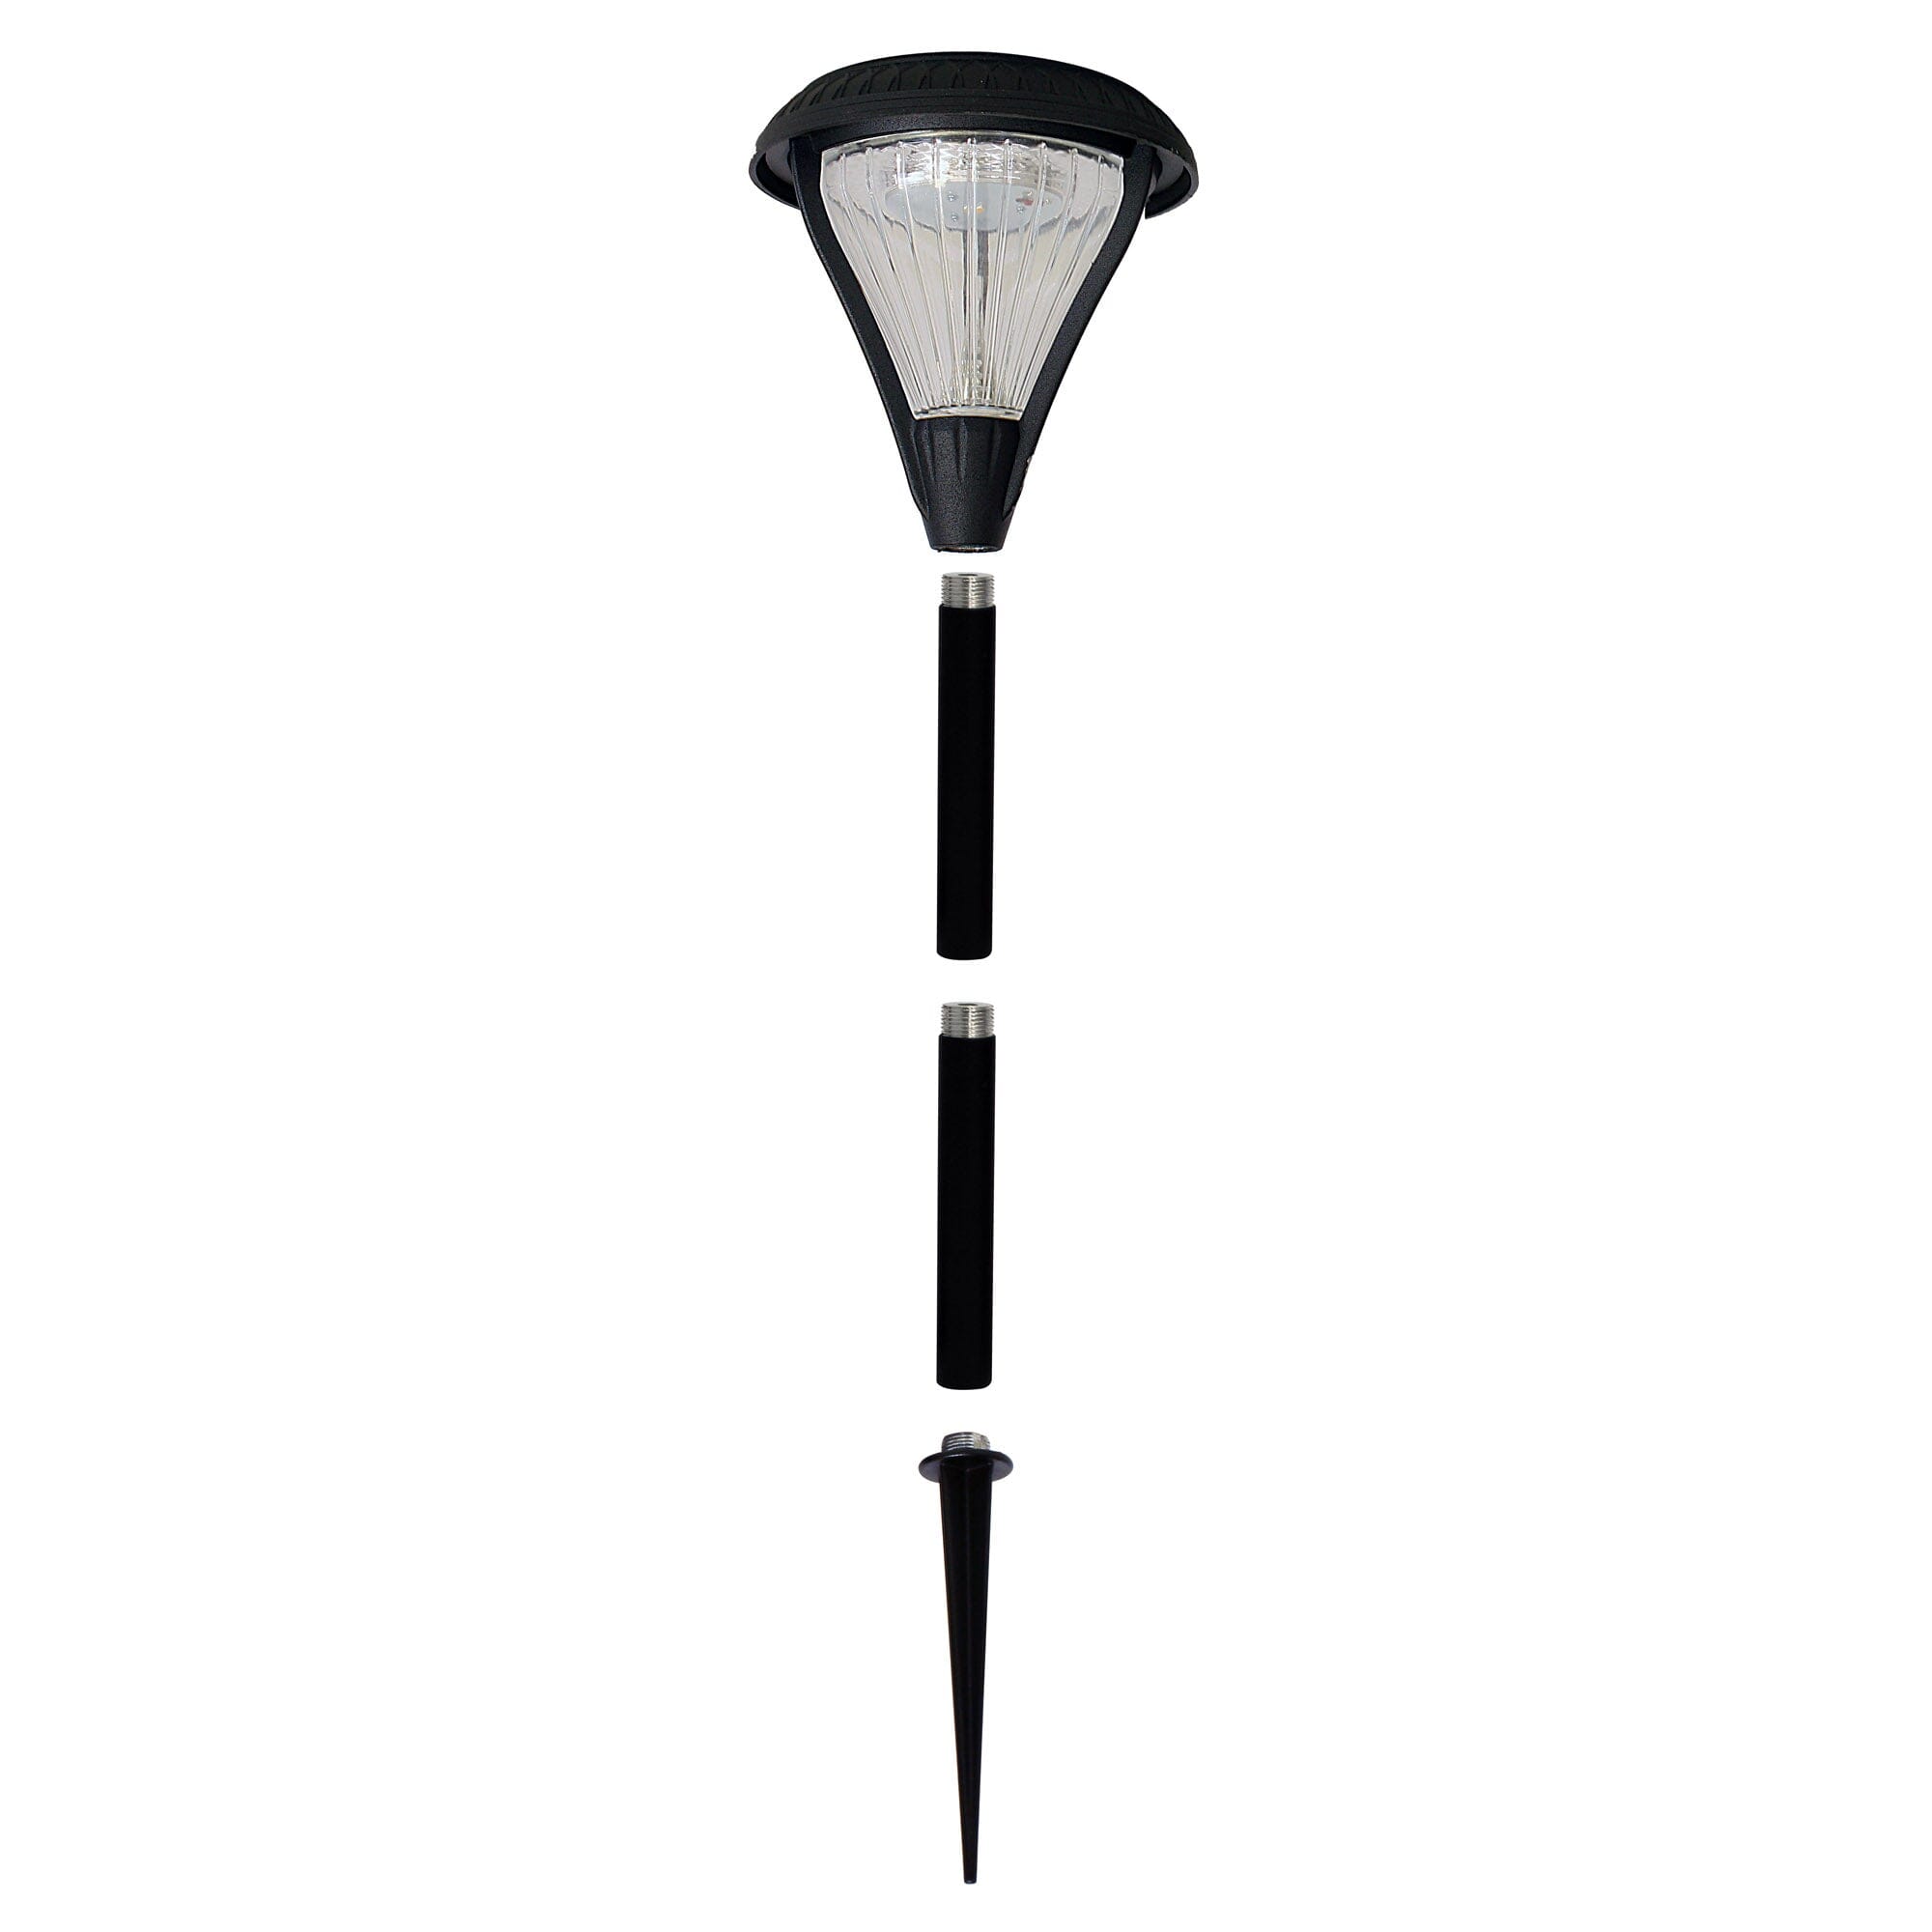 Classic Solar Pathway Light | 2 Pack | Choose Bright or Warm White